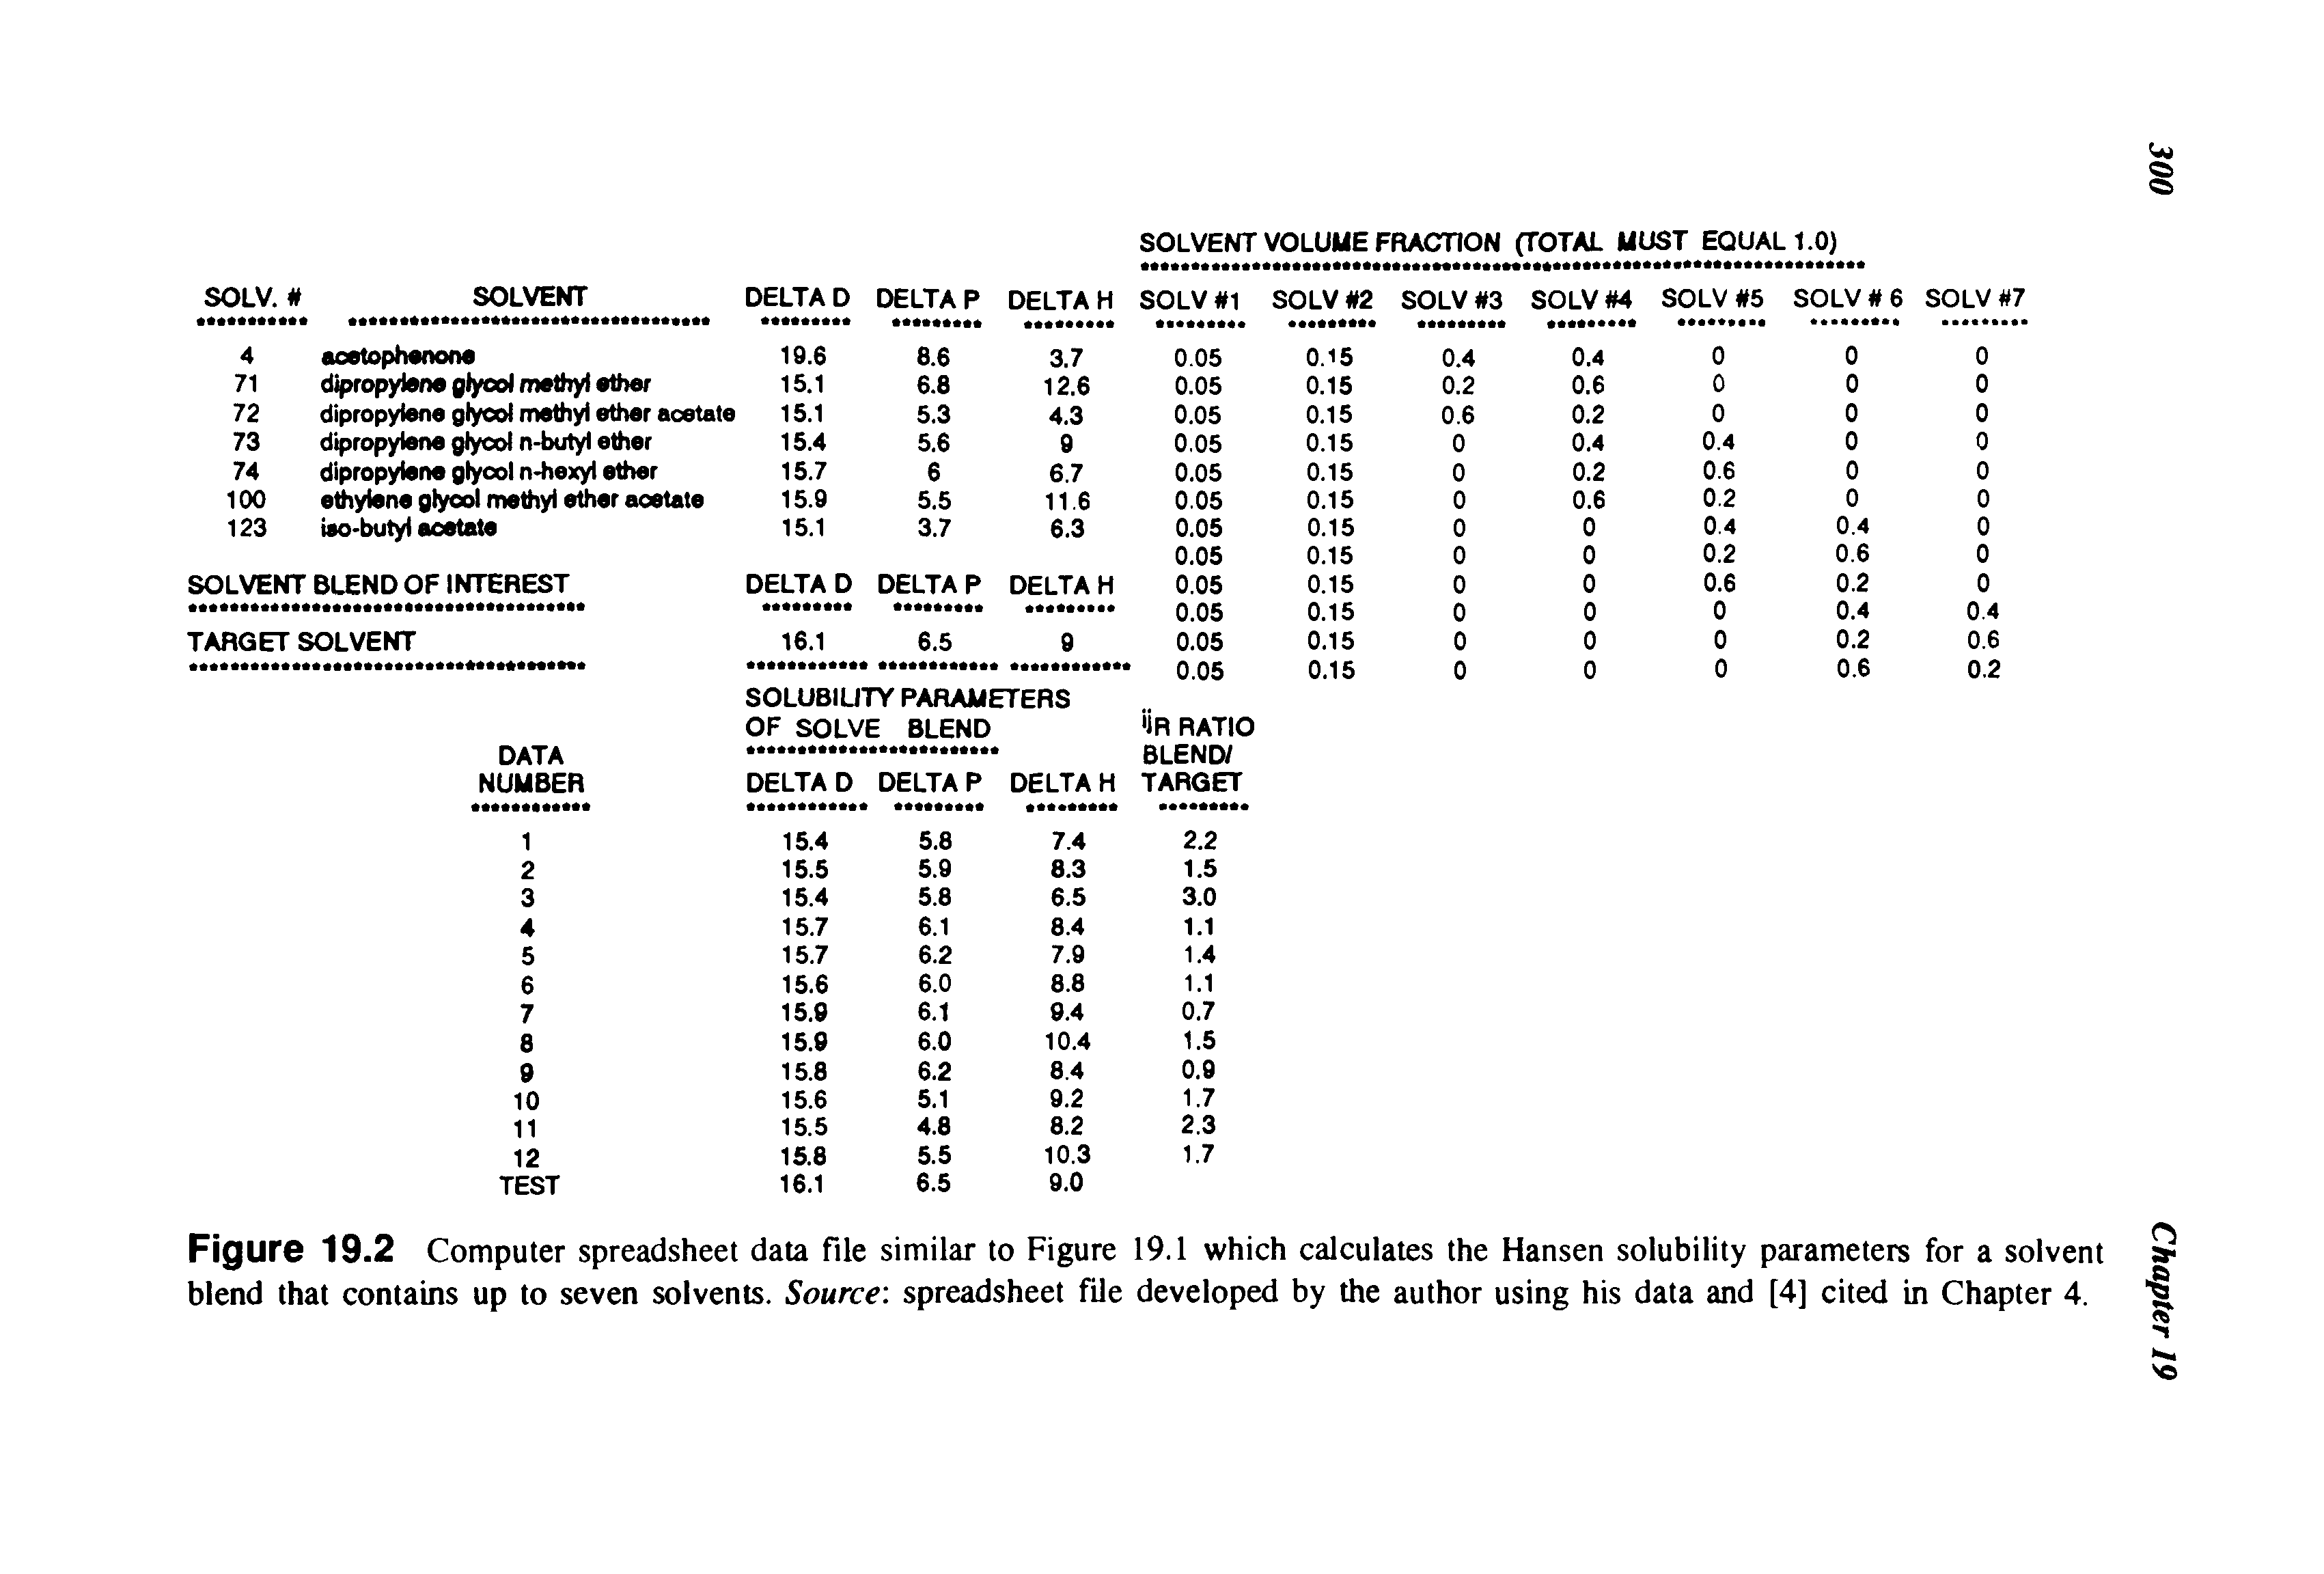 Figure 19.2 Computer spreadsheet data file similar to Figure 19.1 which calculates the Hansen solubility parameters for a solvent blend that contains up to seven solvents. Source spreadsheet file developed by the author using his data and [4] cited in Chapter 4.